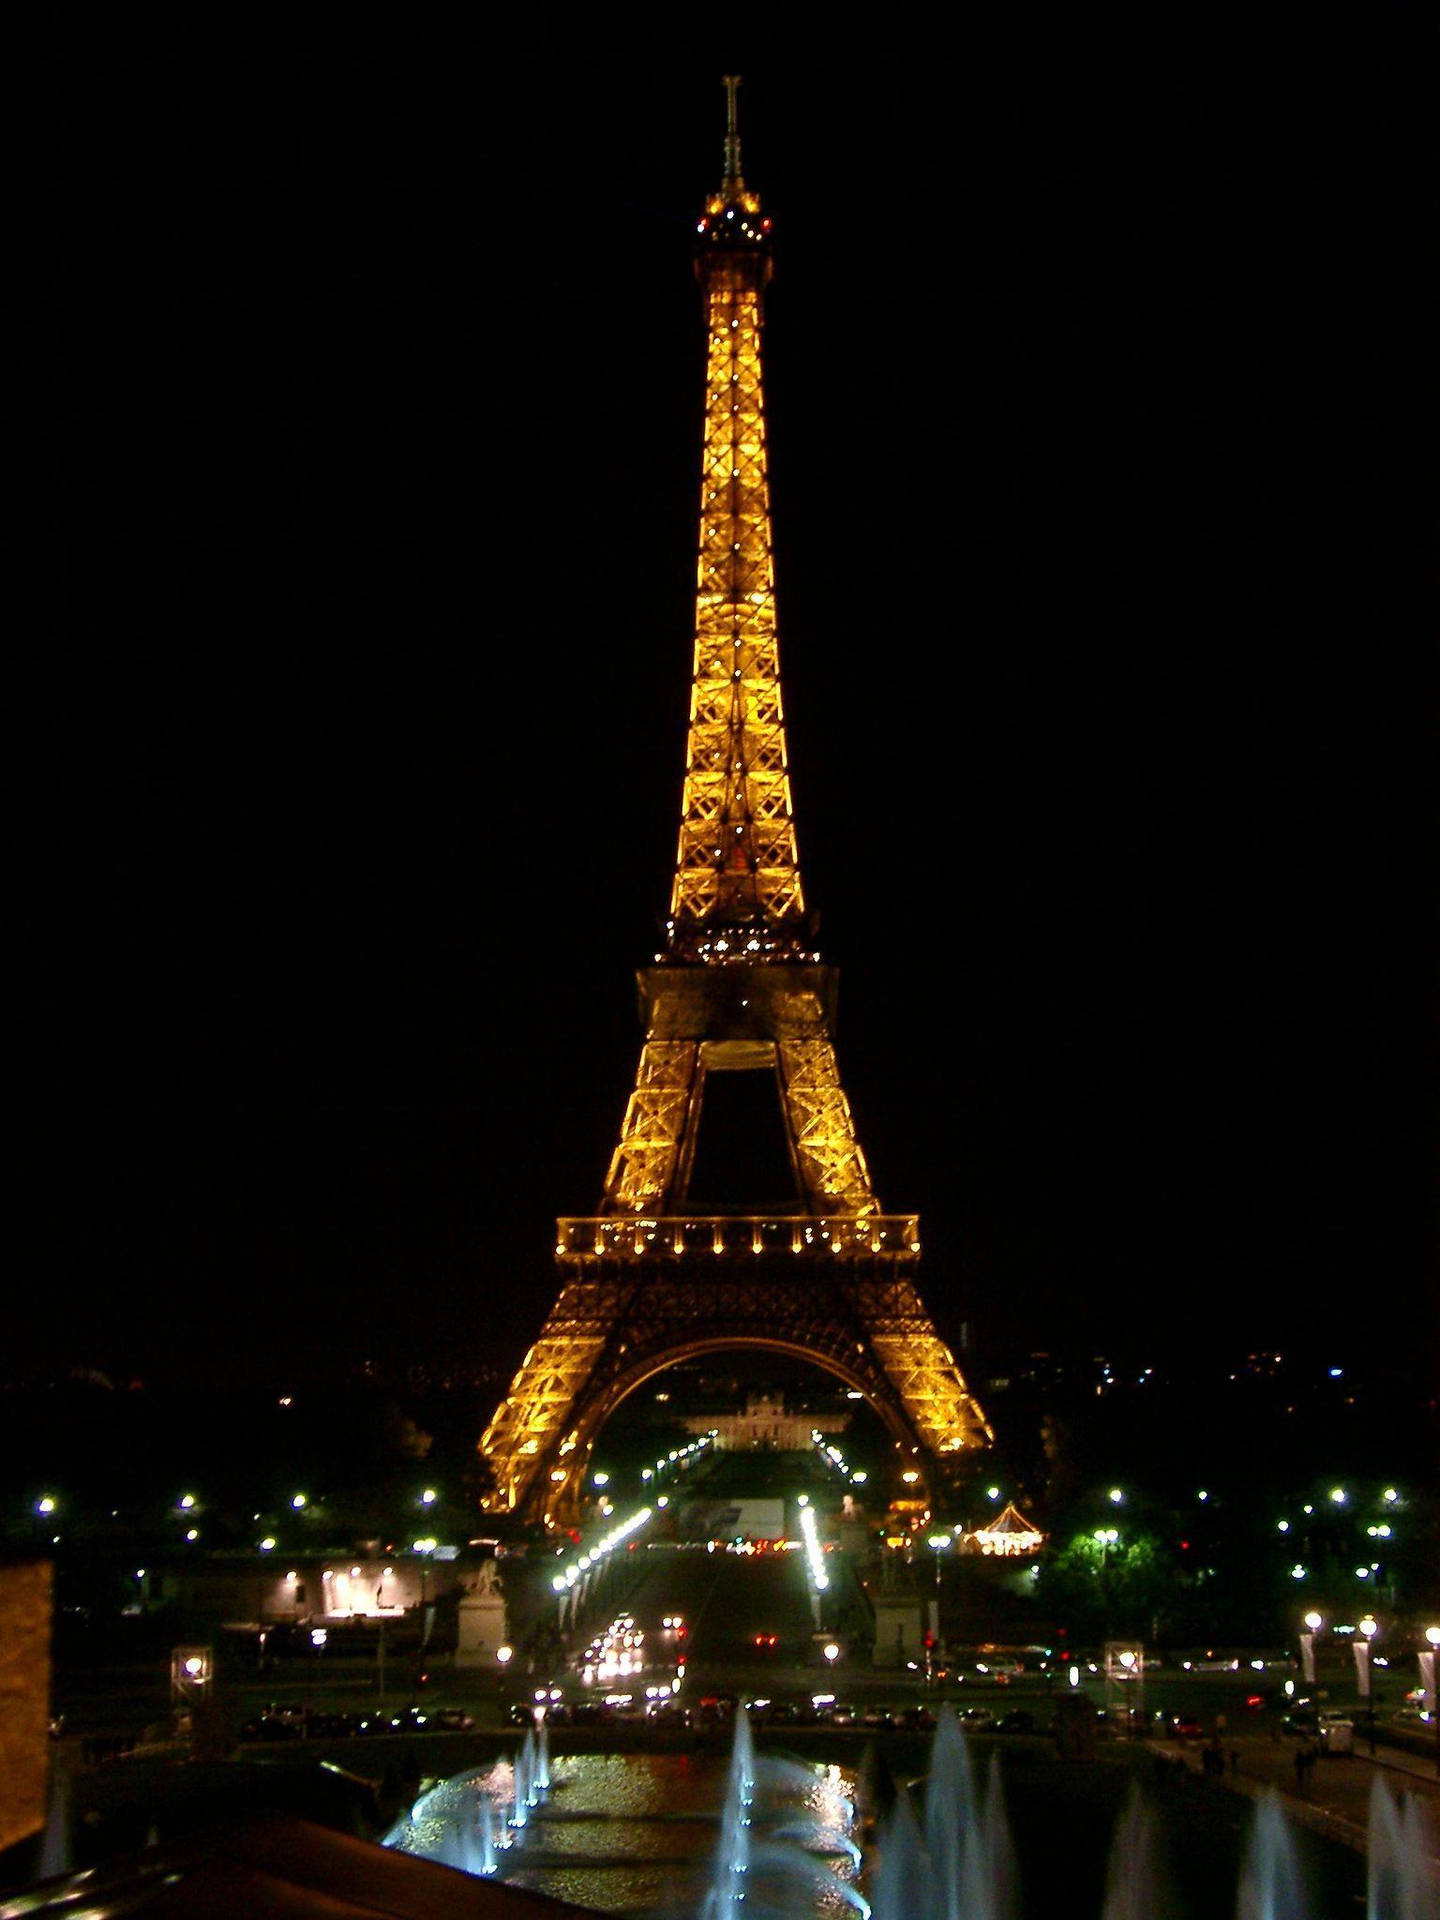 “The View of the Eiffel Tower In Paris” Wallpaper